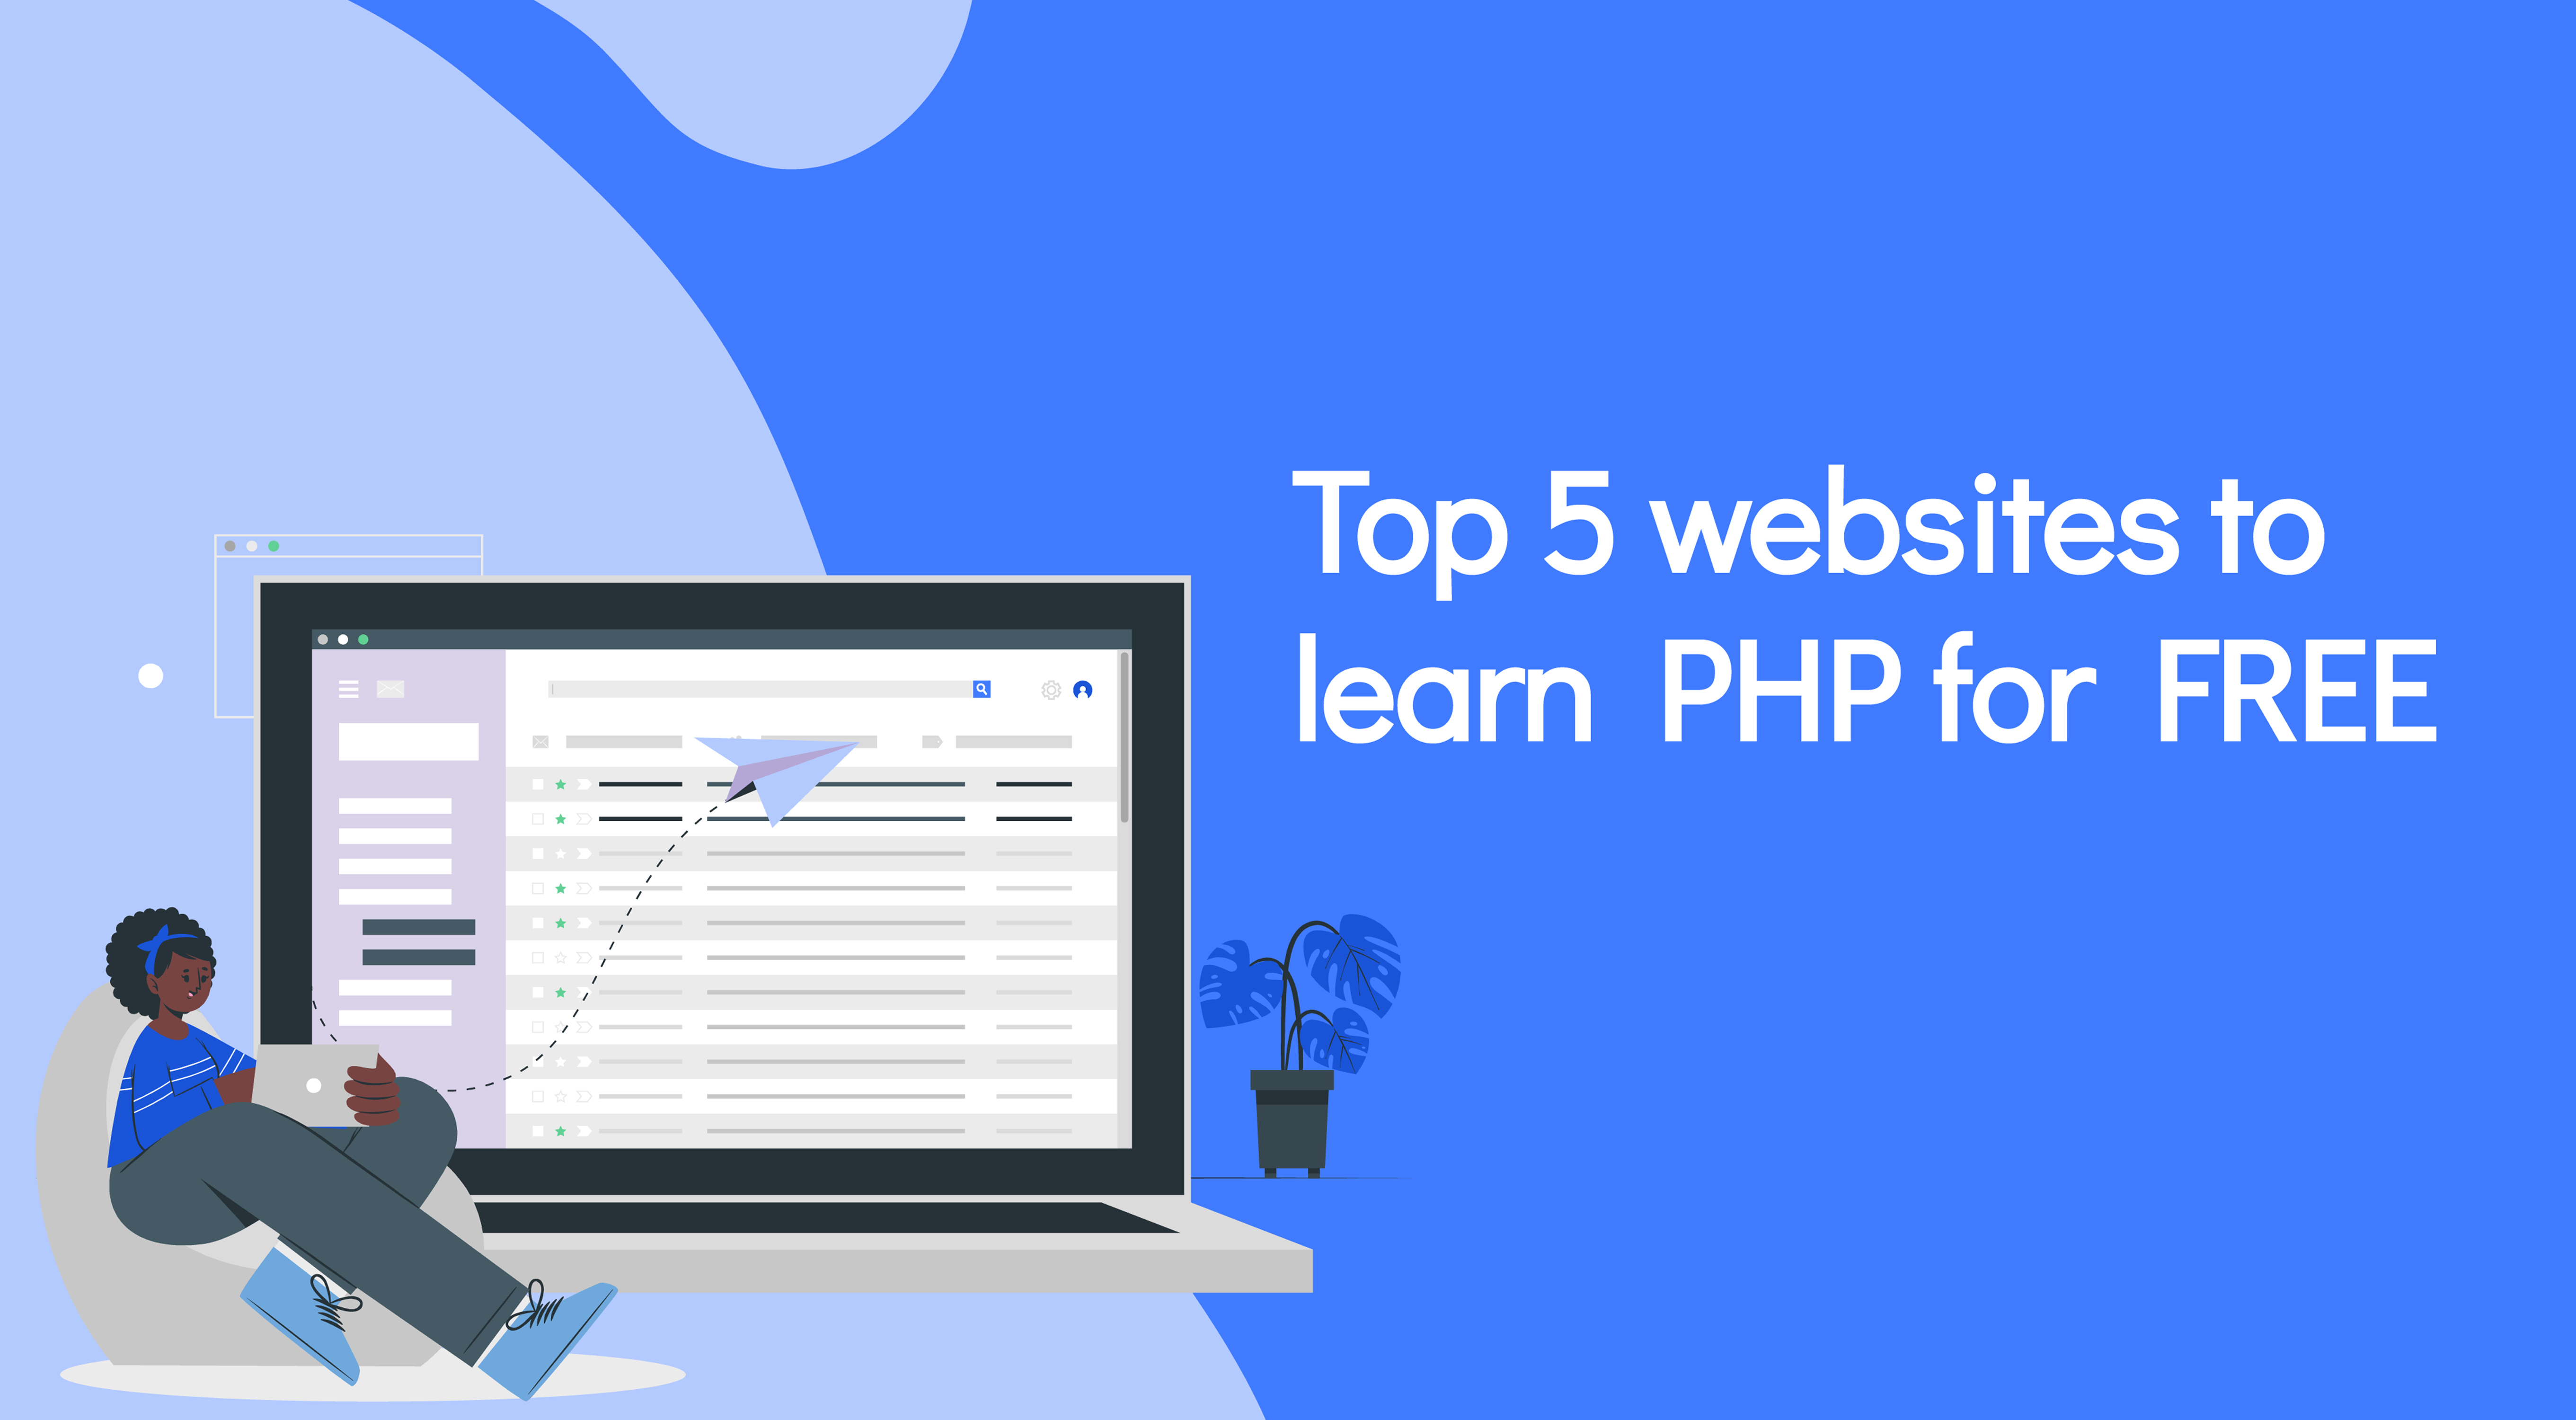 Top 5 websites to learn PHP for FREE